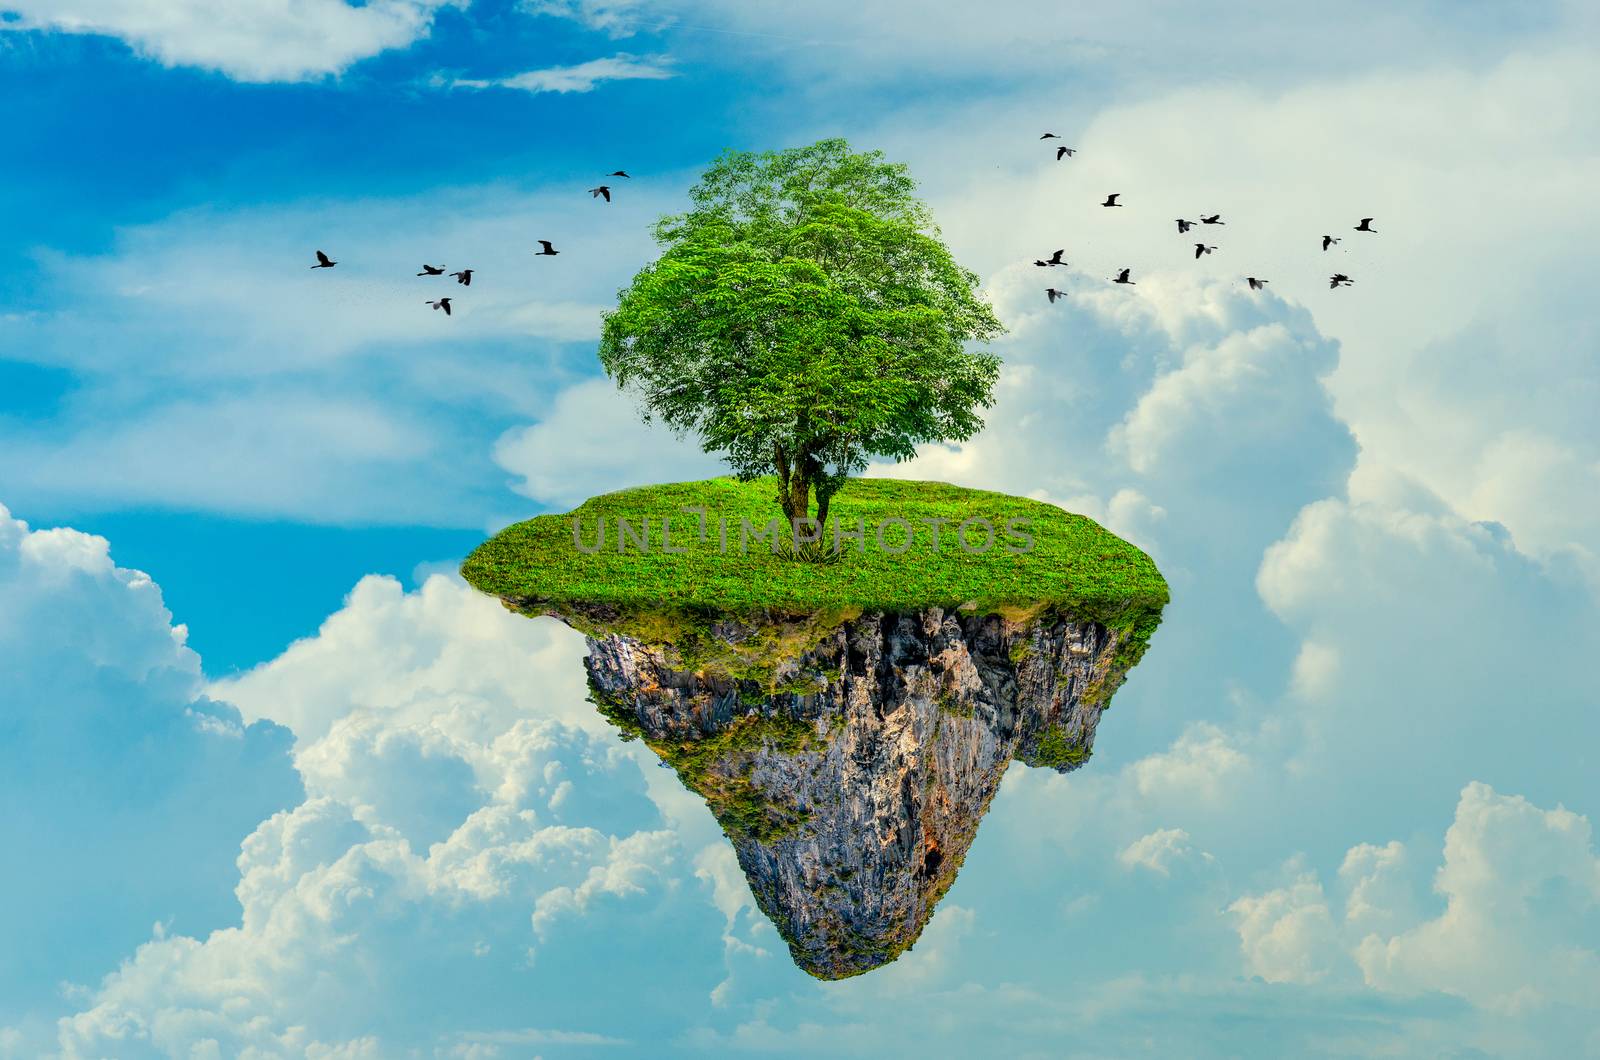 The island floats in the sky with 1 tree on the island. 3D